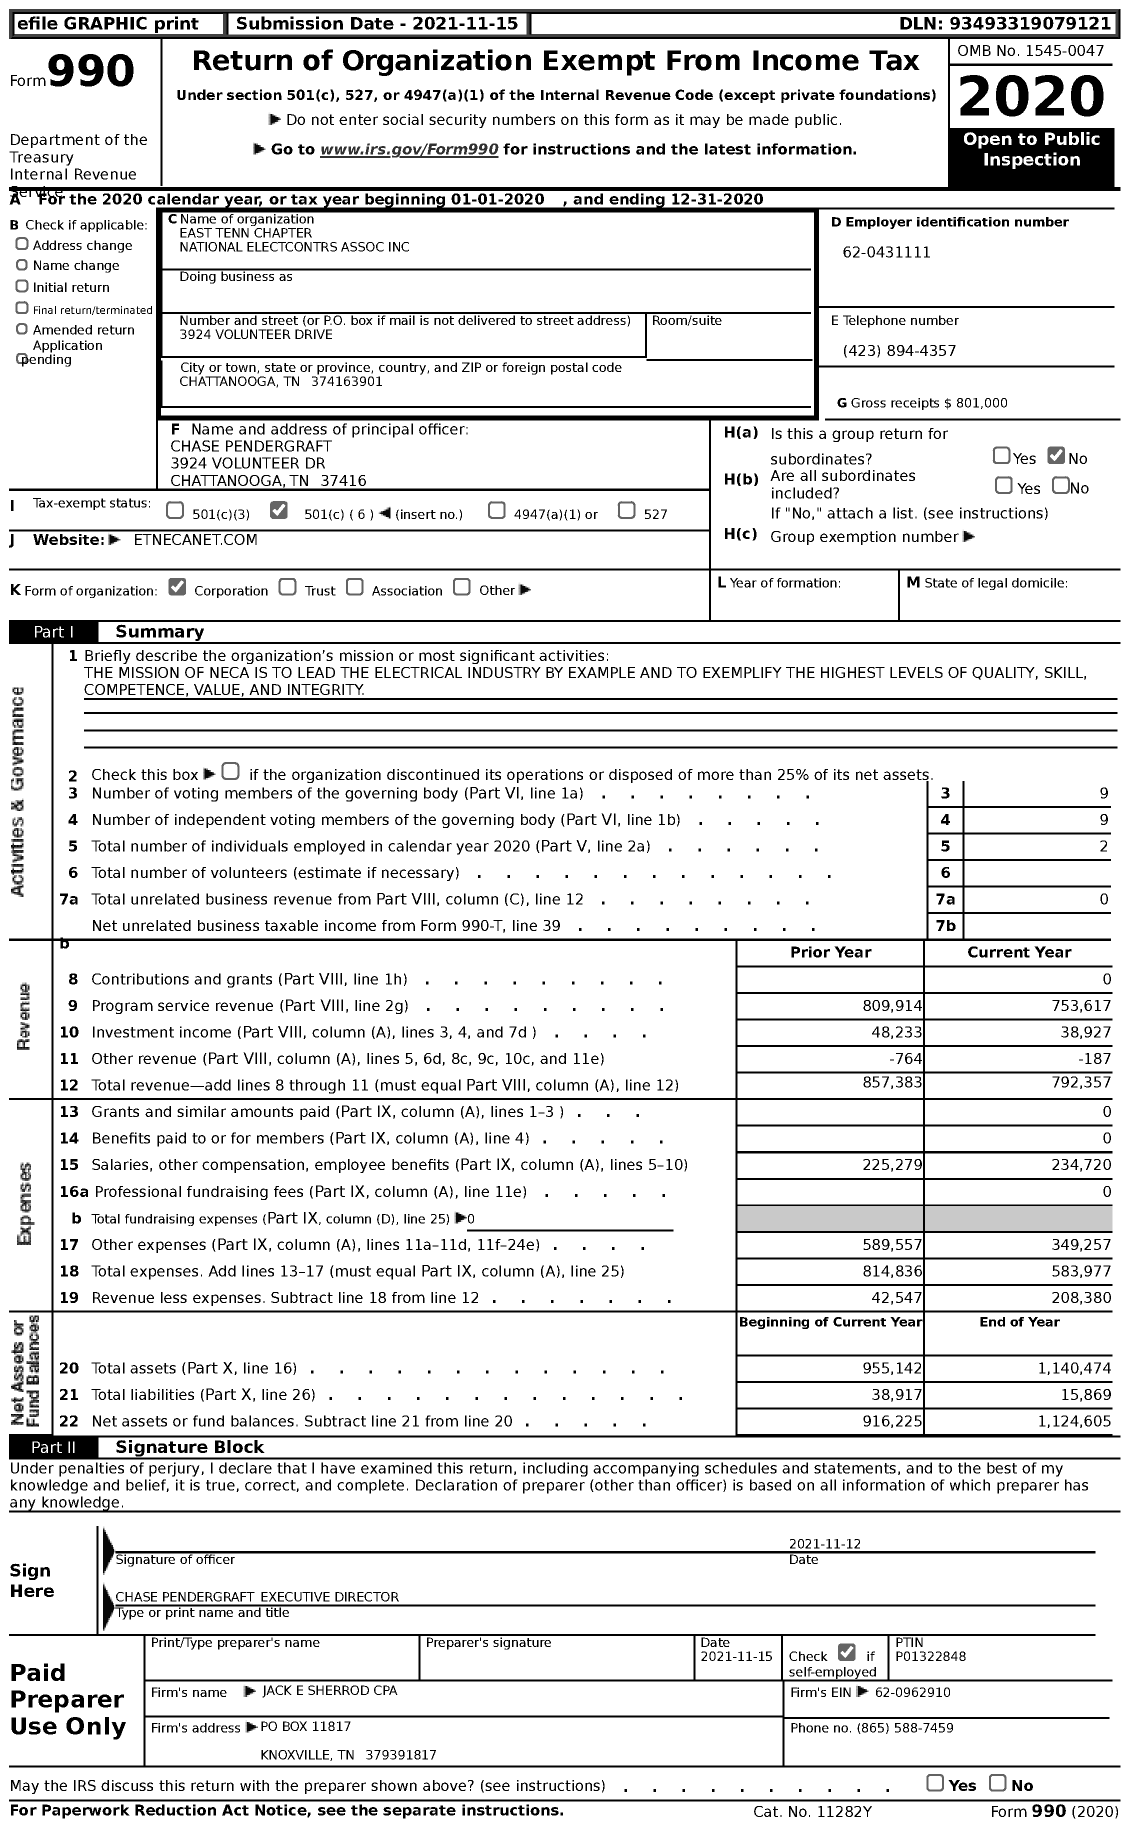 Image of first page of 2020 Form 990 for East Tenn Chapter National Electcontrs Accoc